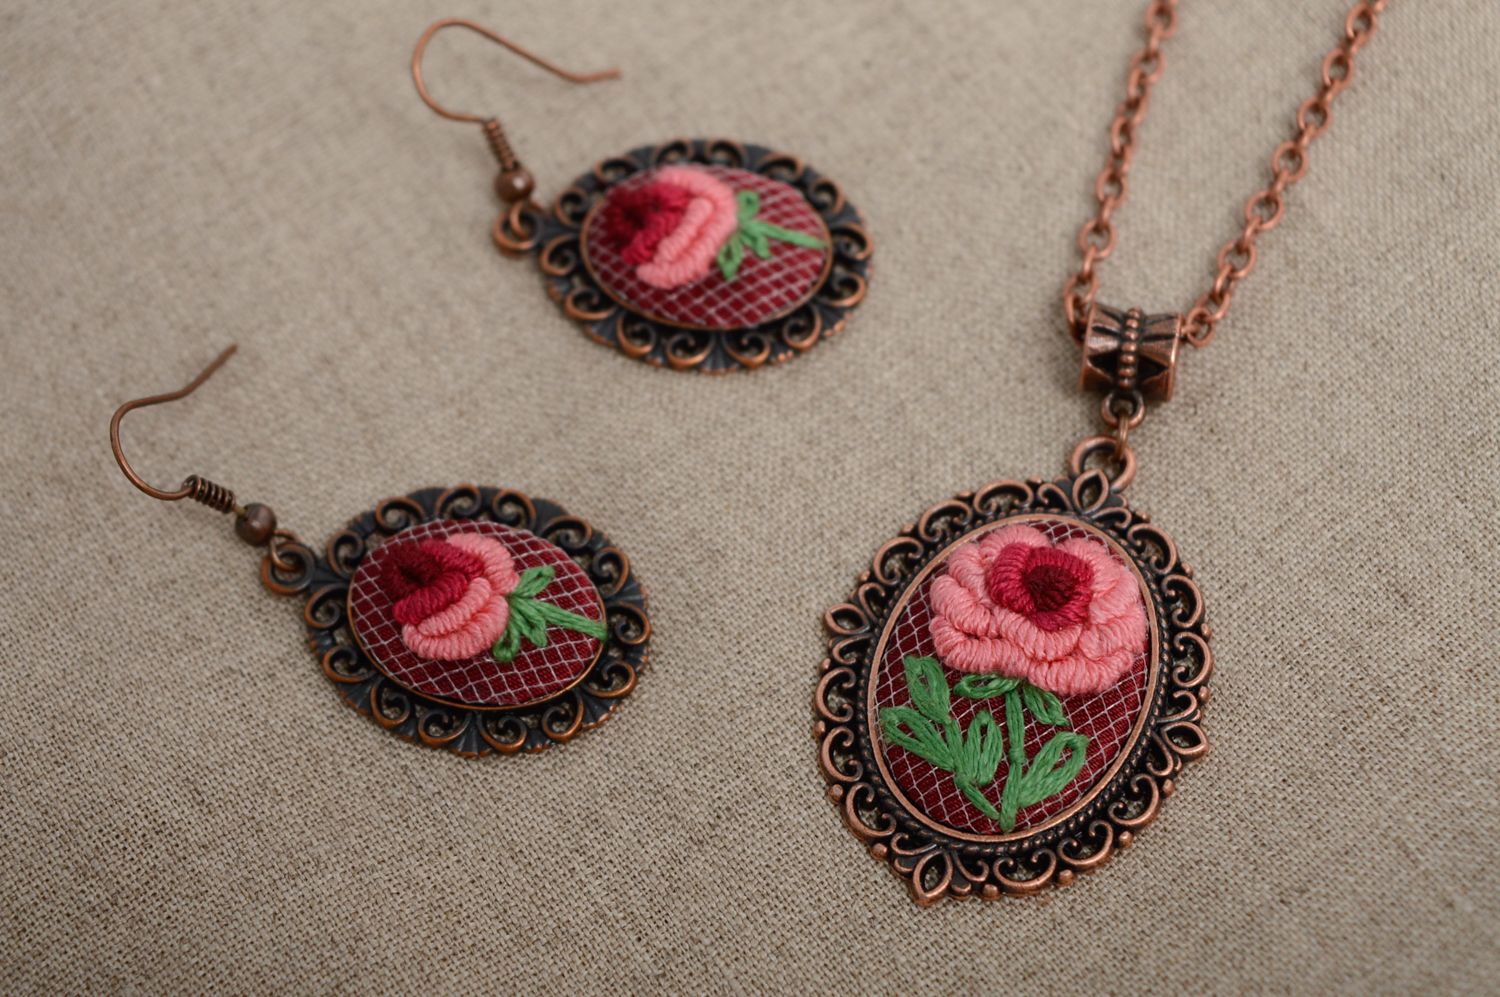 Unusual pendant with embroidery on long chain photo 5